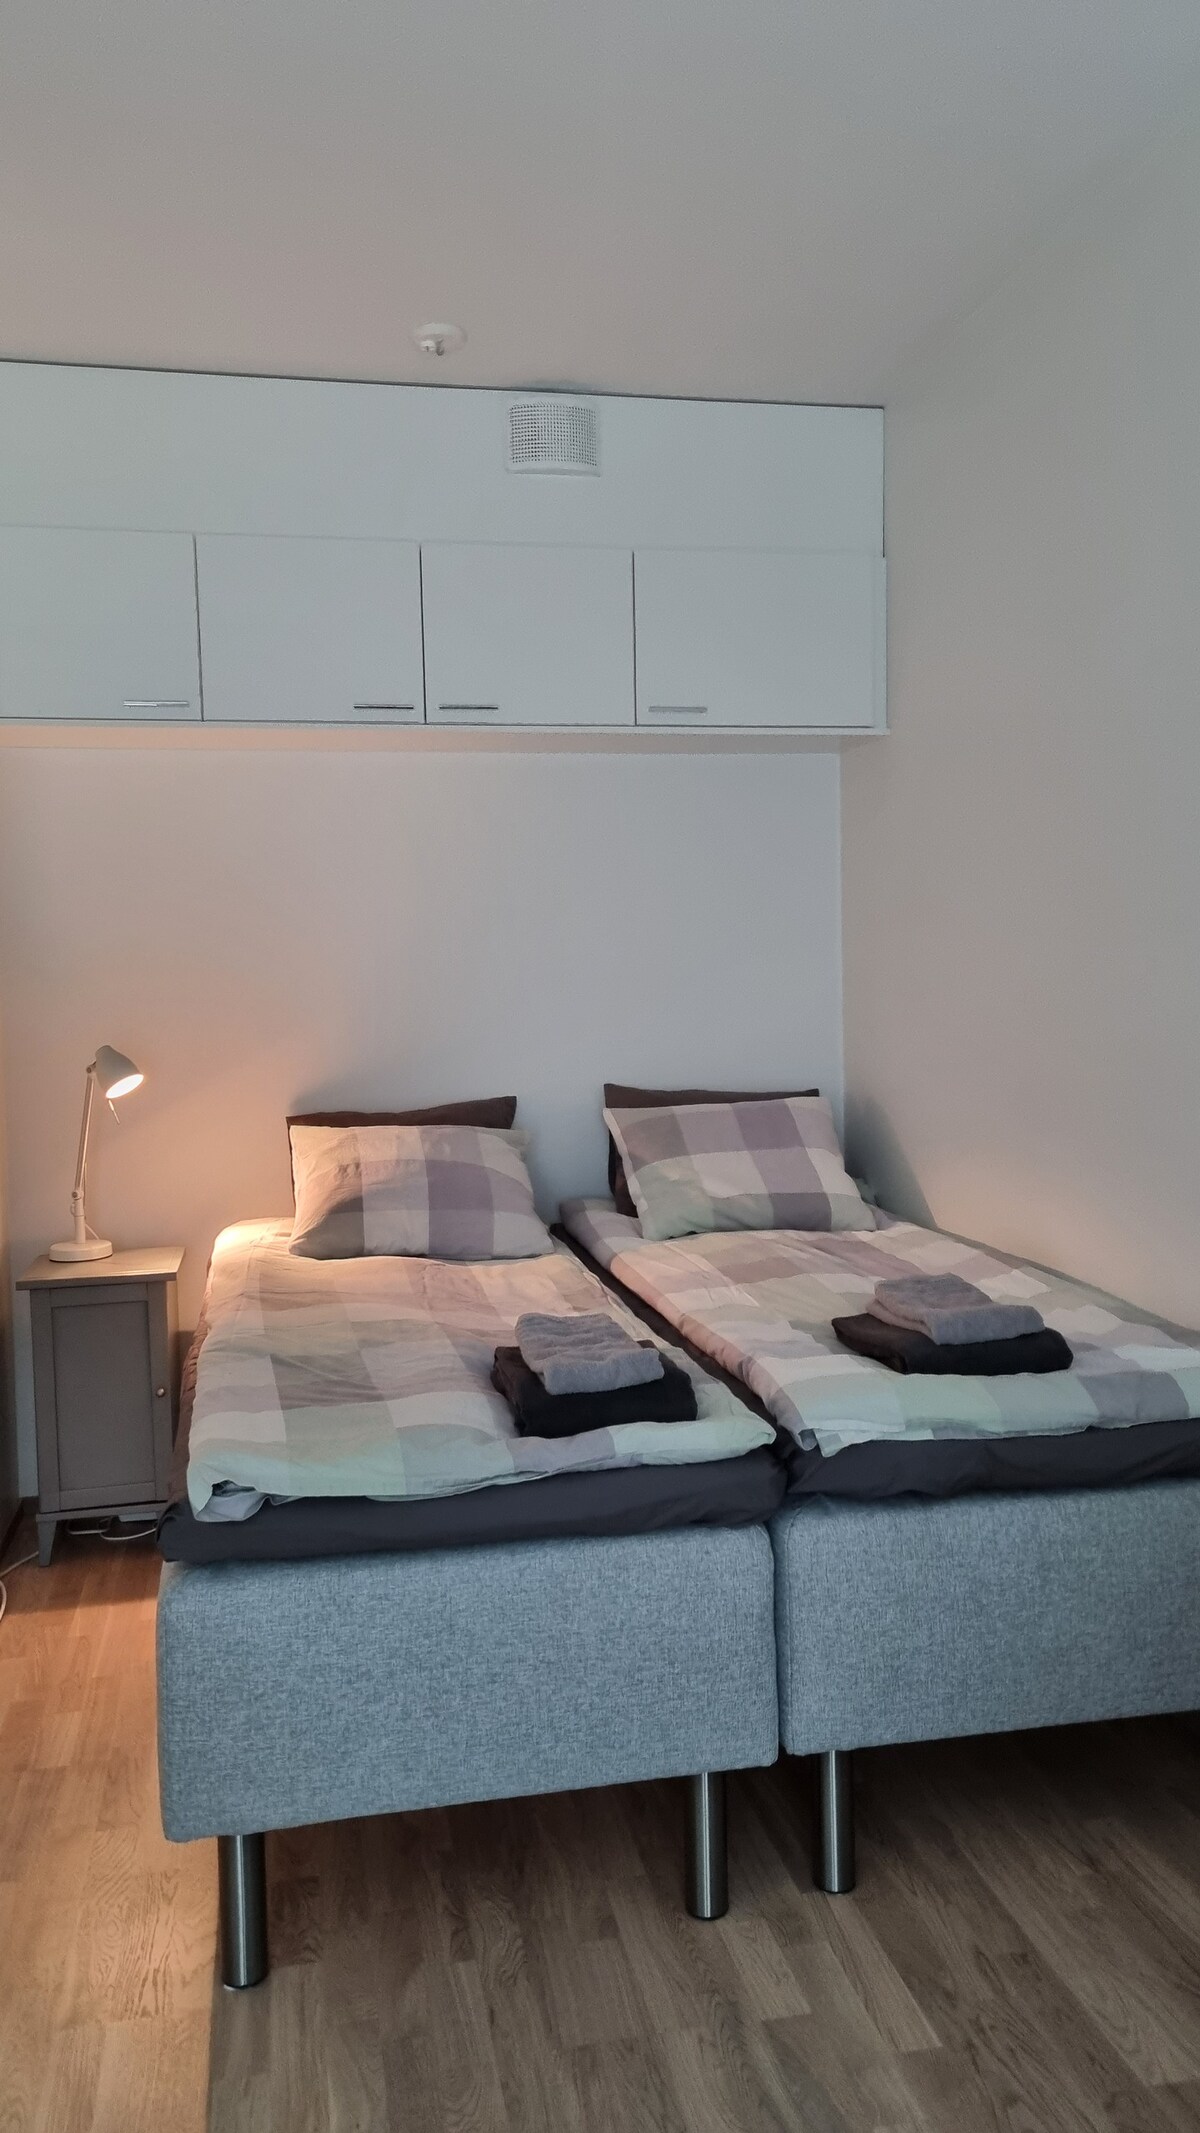 New and cozy apartment in the heart of Kuopio